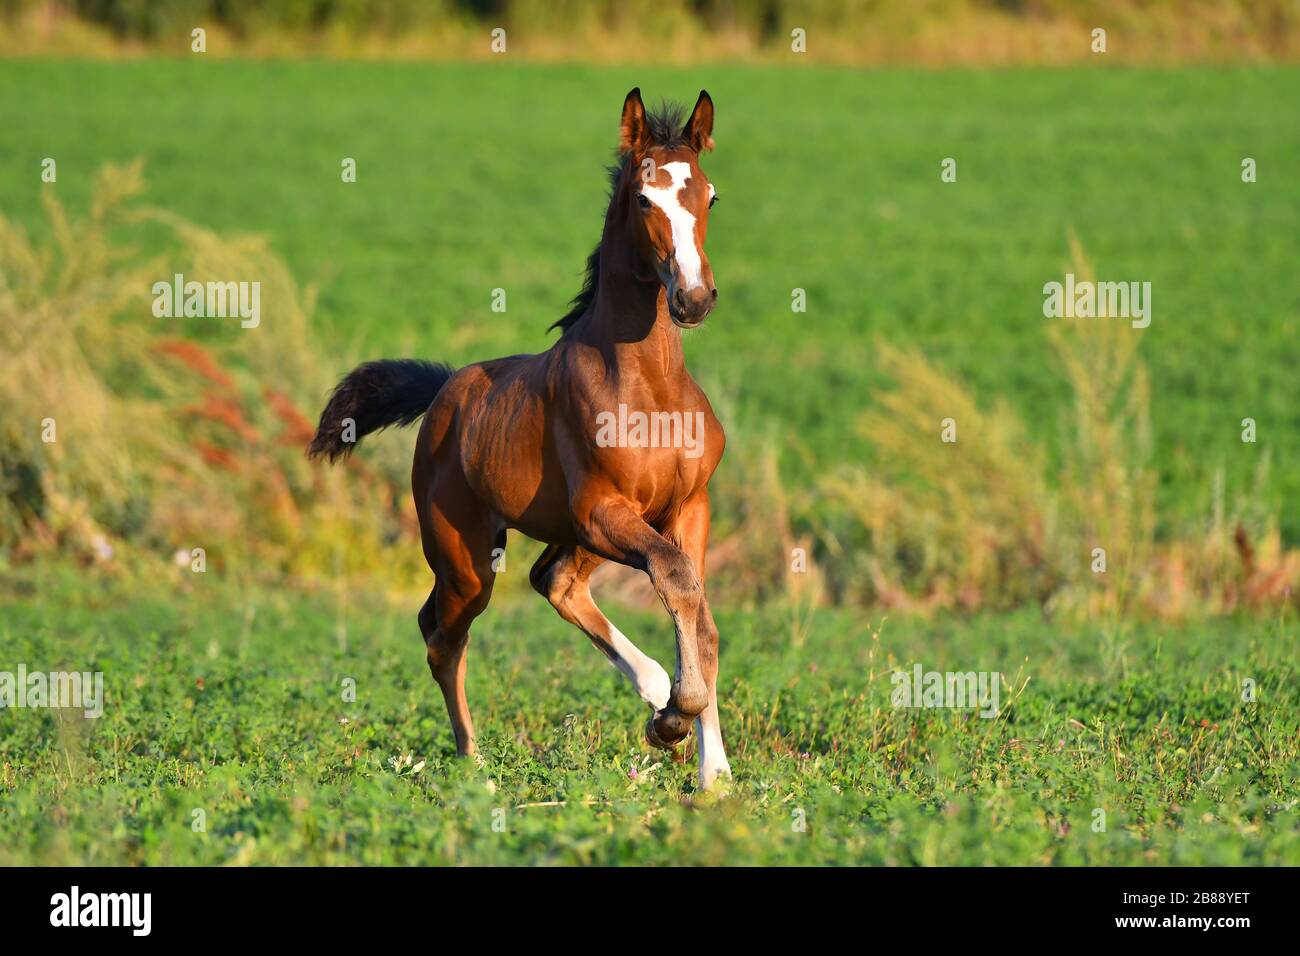 Bay foal with large white blaze running in gallop around field. Stock Photo